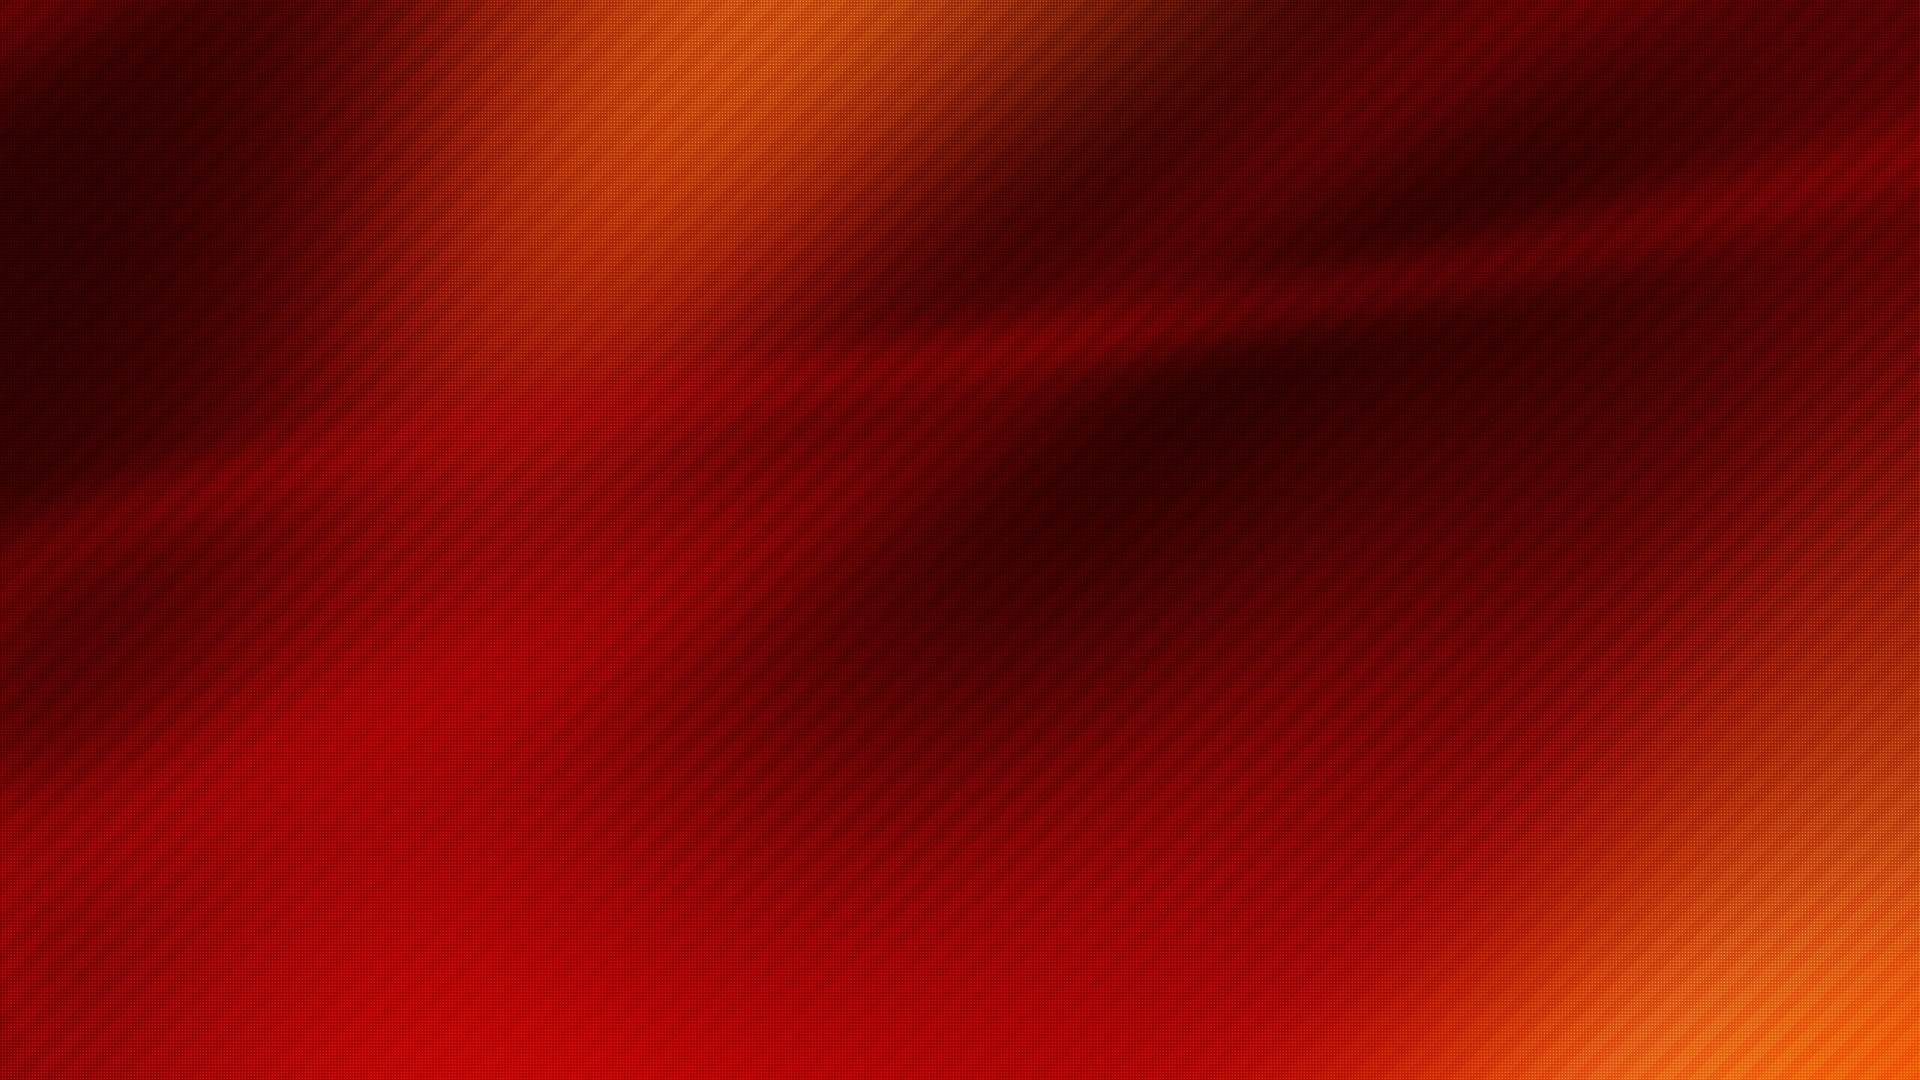 Solid Red wallpaper photo hd